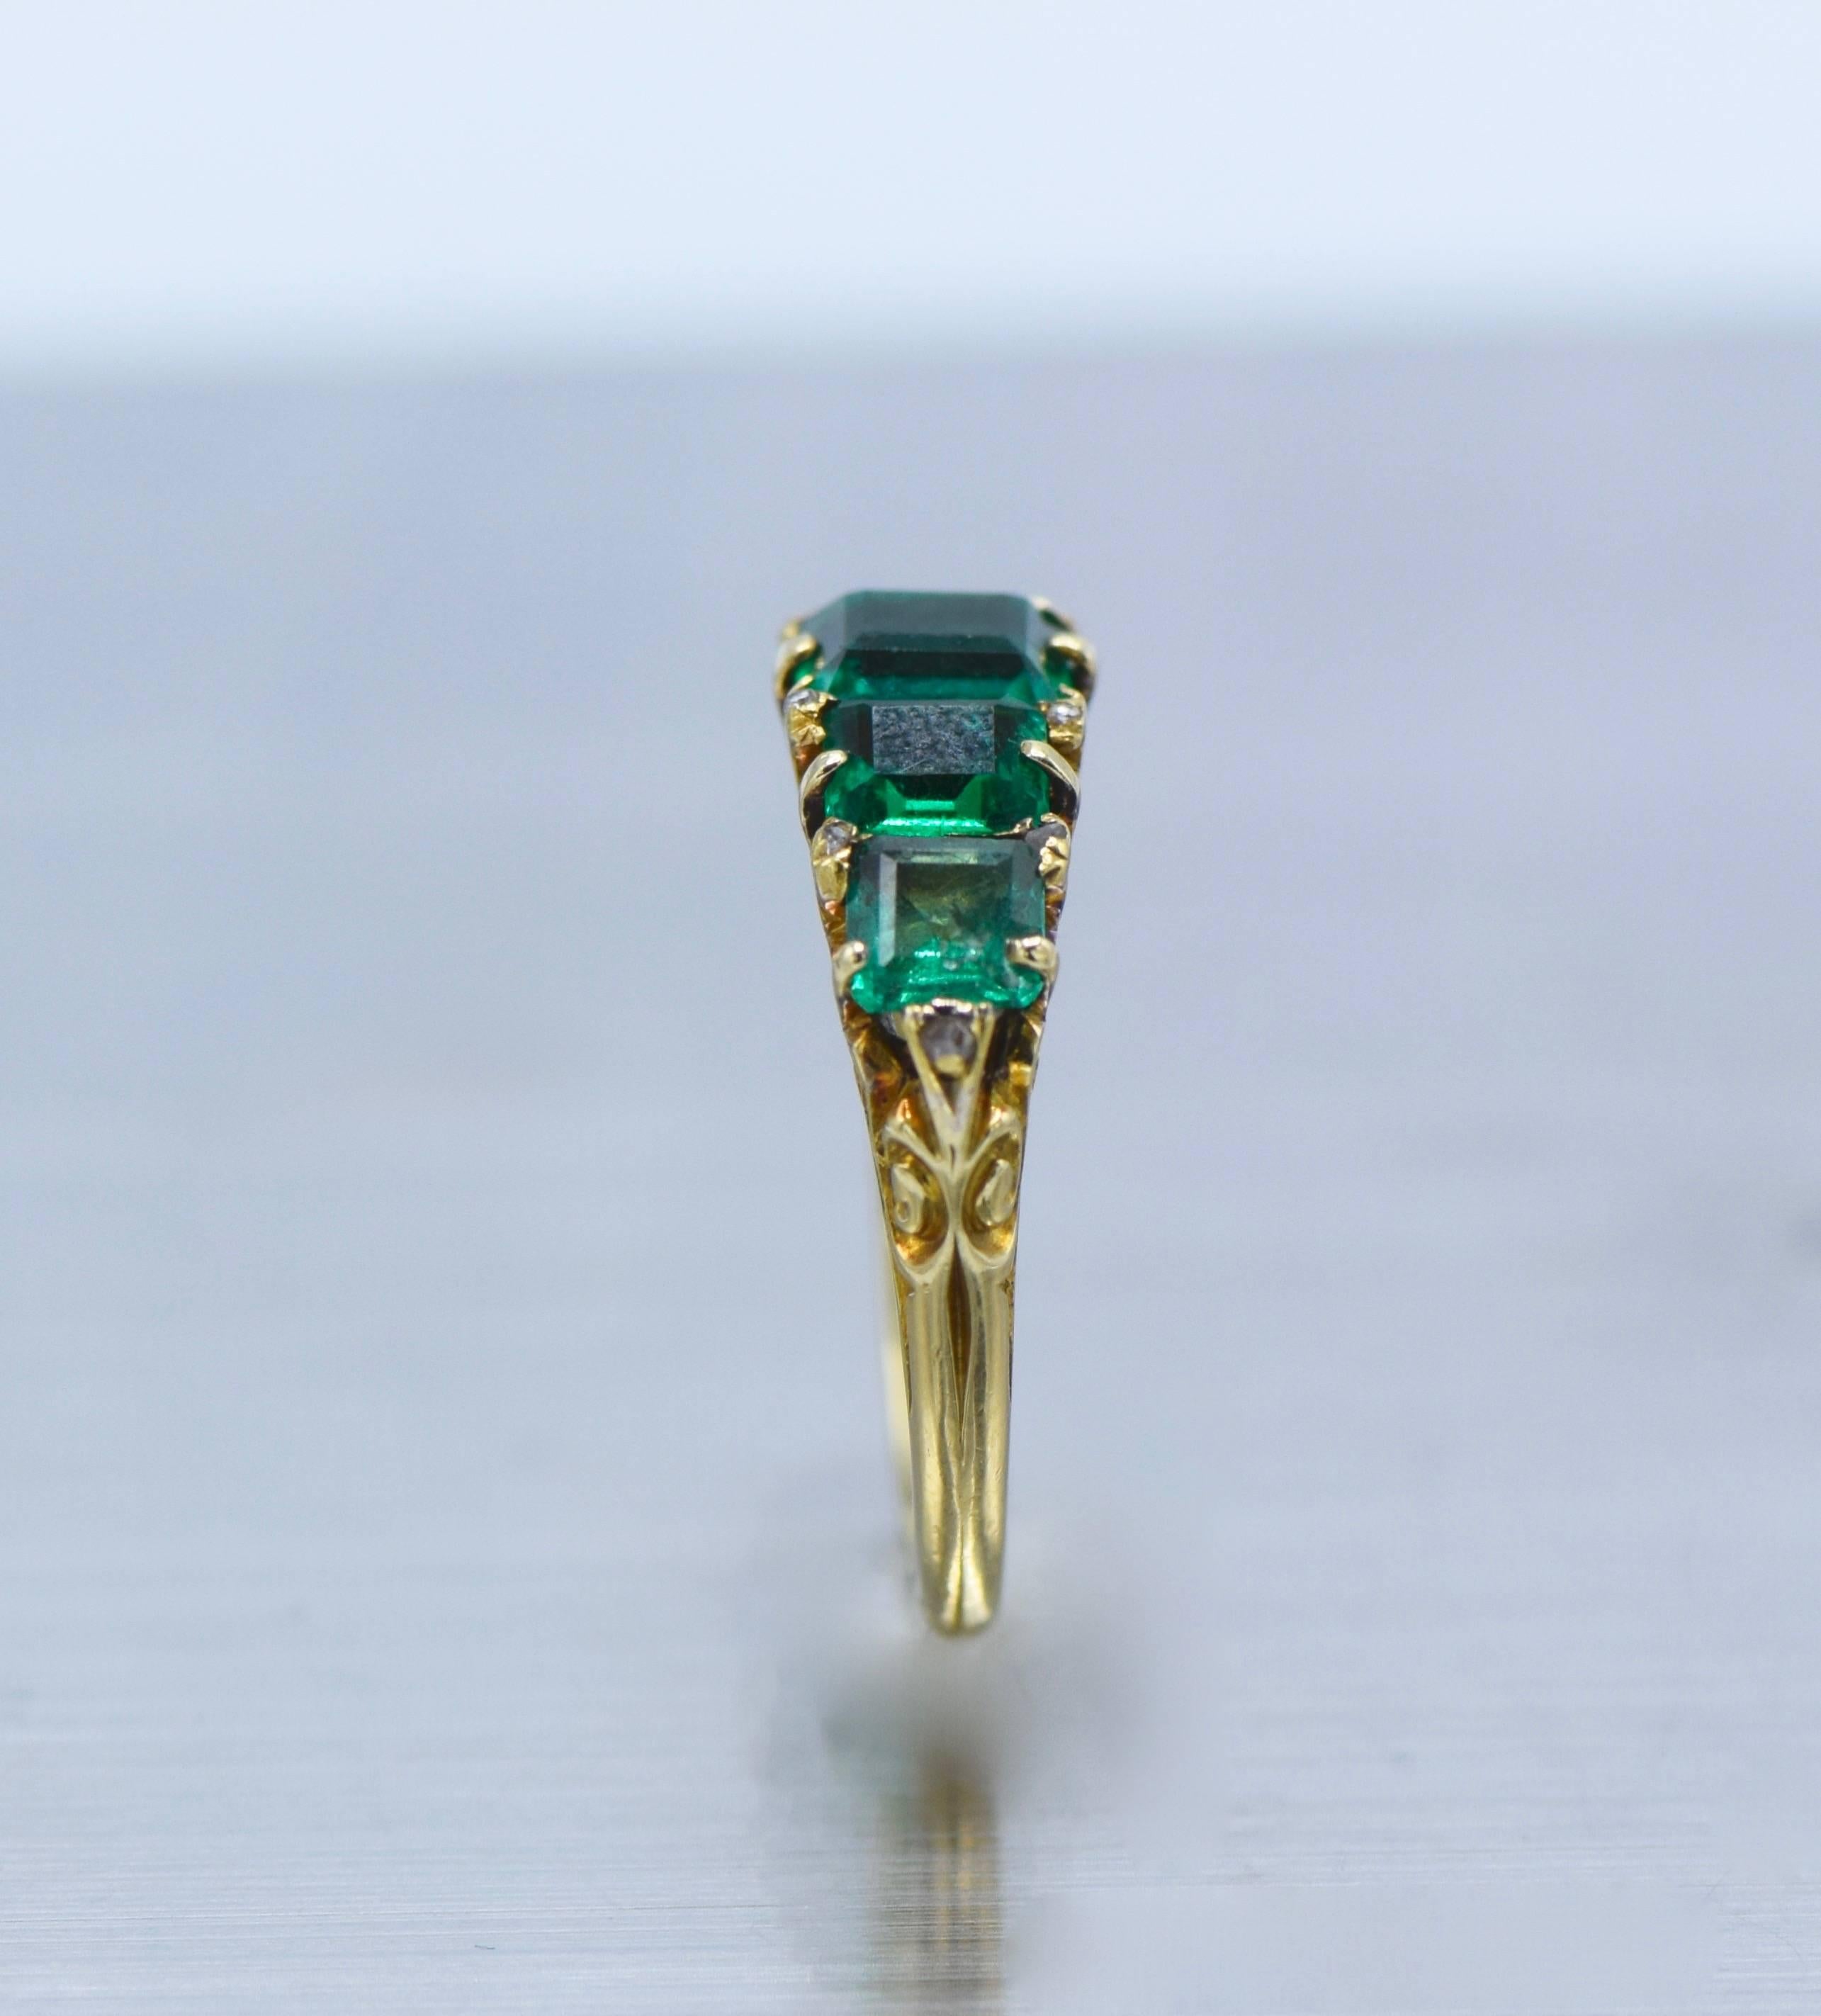 Antique Columbian Design Emerald Ring embedded in 18k Gold 

Green Emerald Weight: 3 Carat 

Size: 5.25 